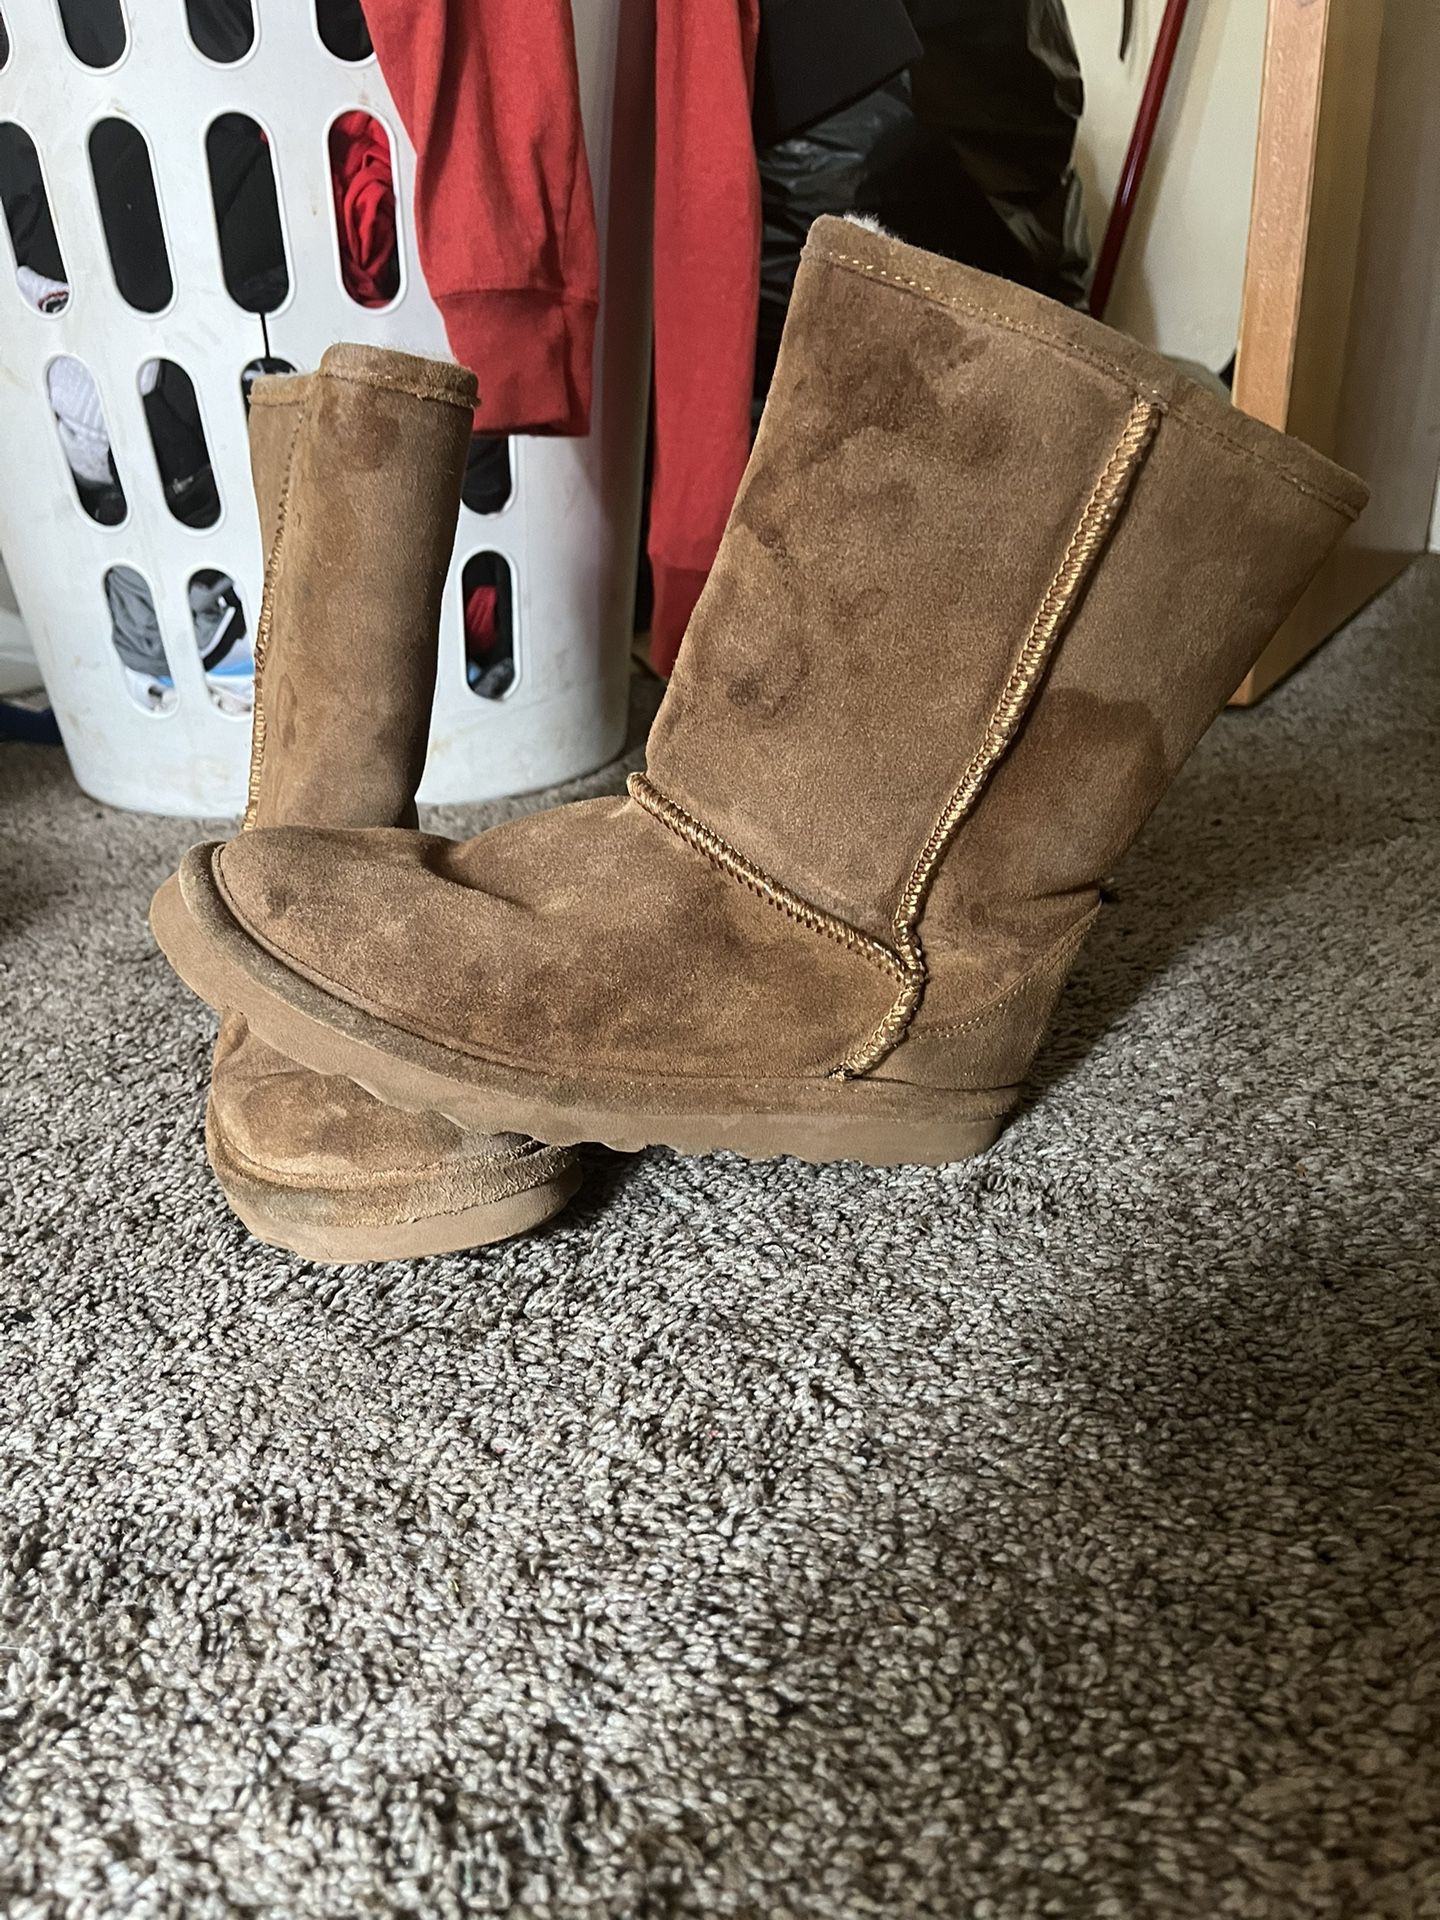 Bear paw Boots Size 8